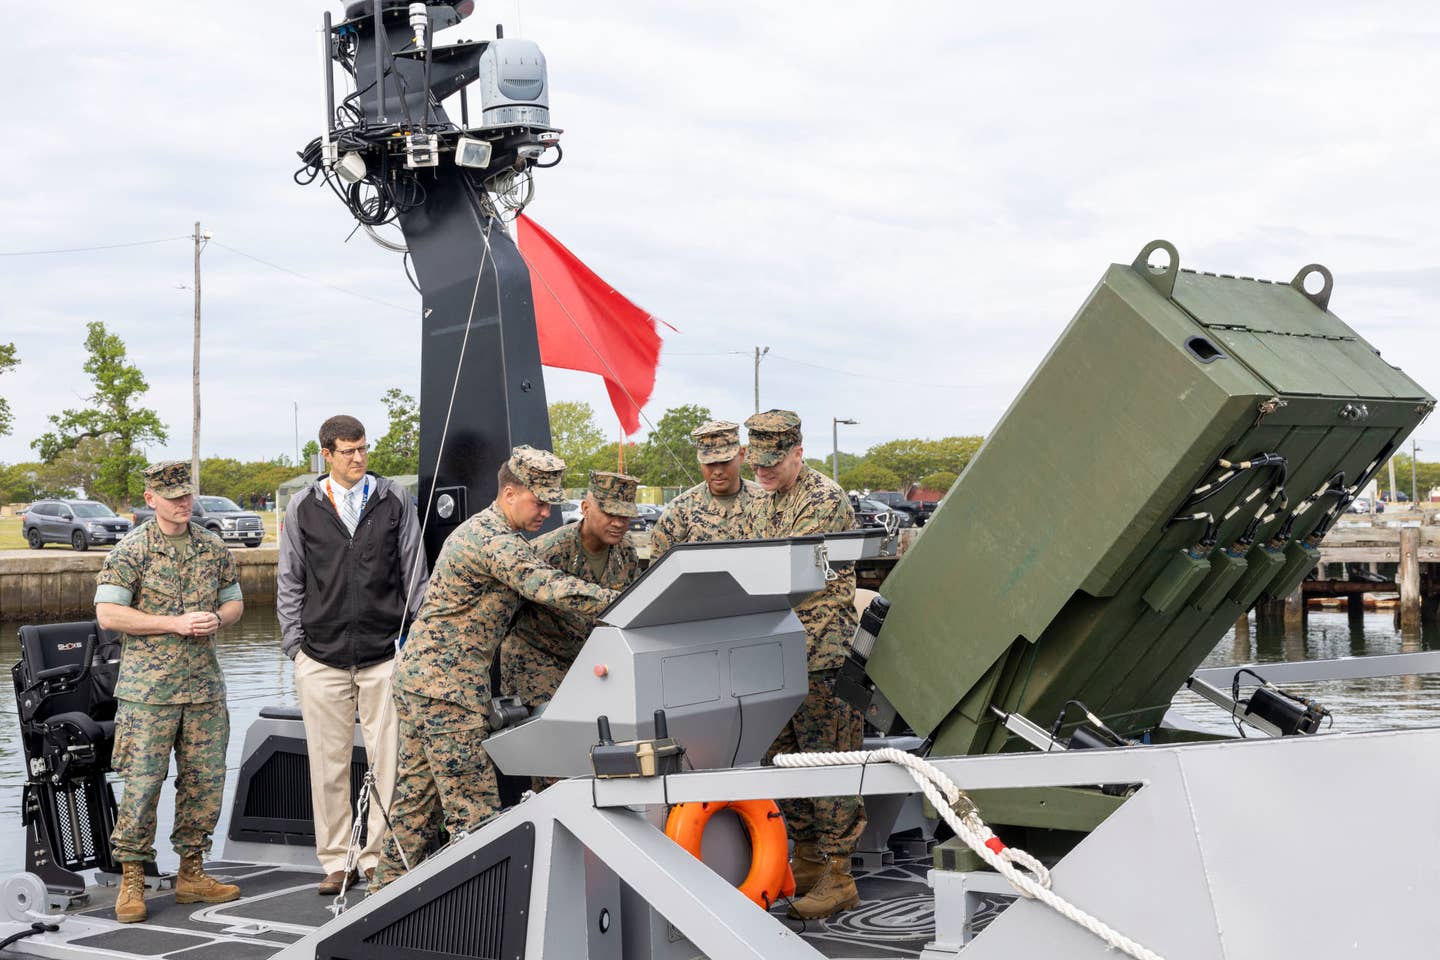 A closer look at the Hero-120 launcher and other parts of the LRUSV that was at the center of Lt. Gen. Brian Cavanaugh's visit last month to Joint Expeditionary Base Little Creek-Fort Story. Cavanaugh is seen here at center, with another Marine pointing out something to him on the drone boat's main onboard control system. <em>USMC</em>